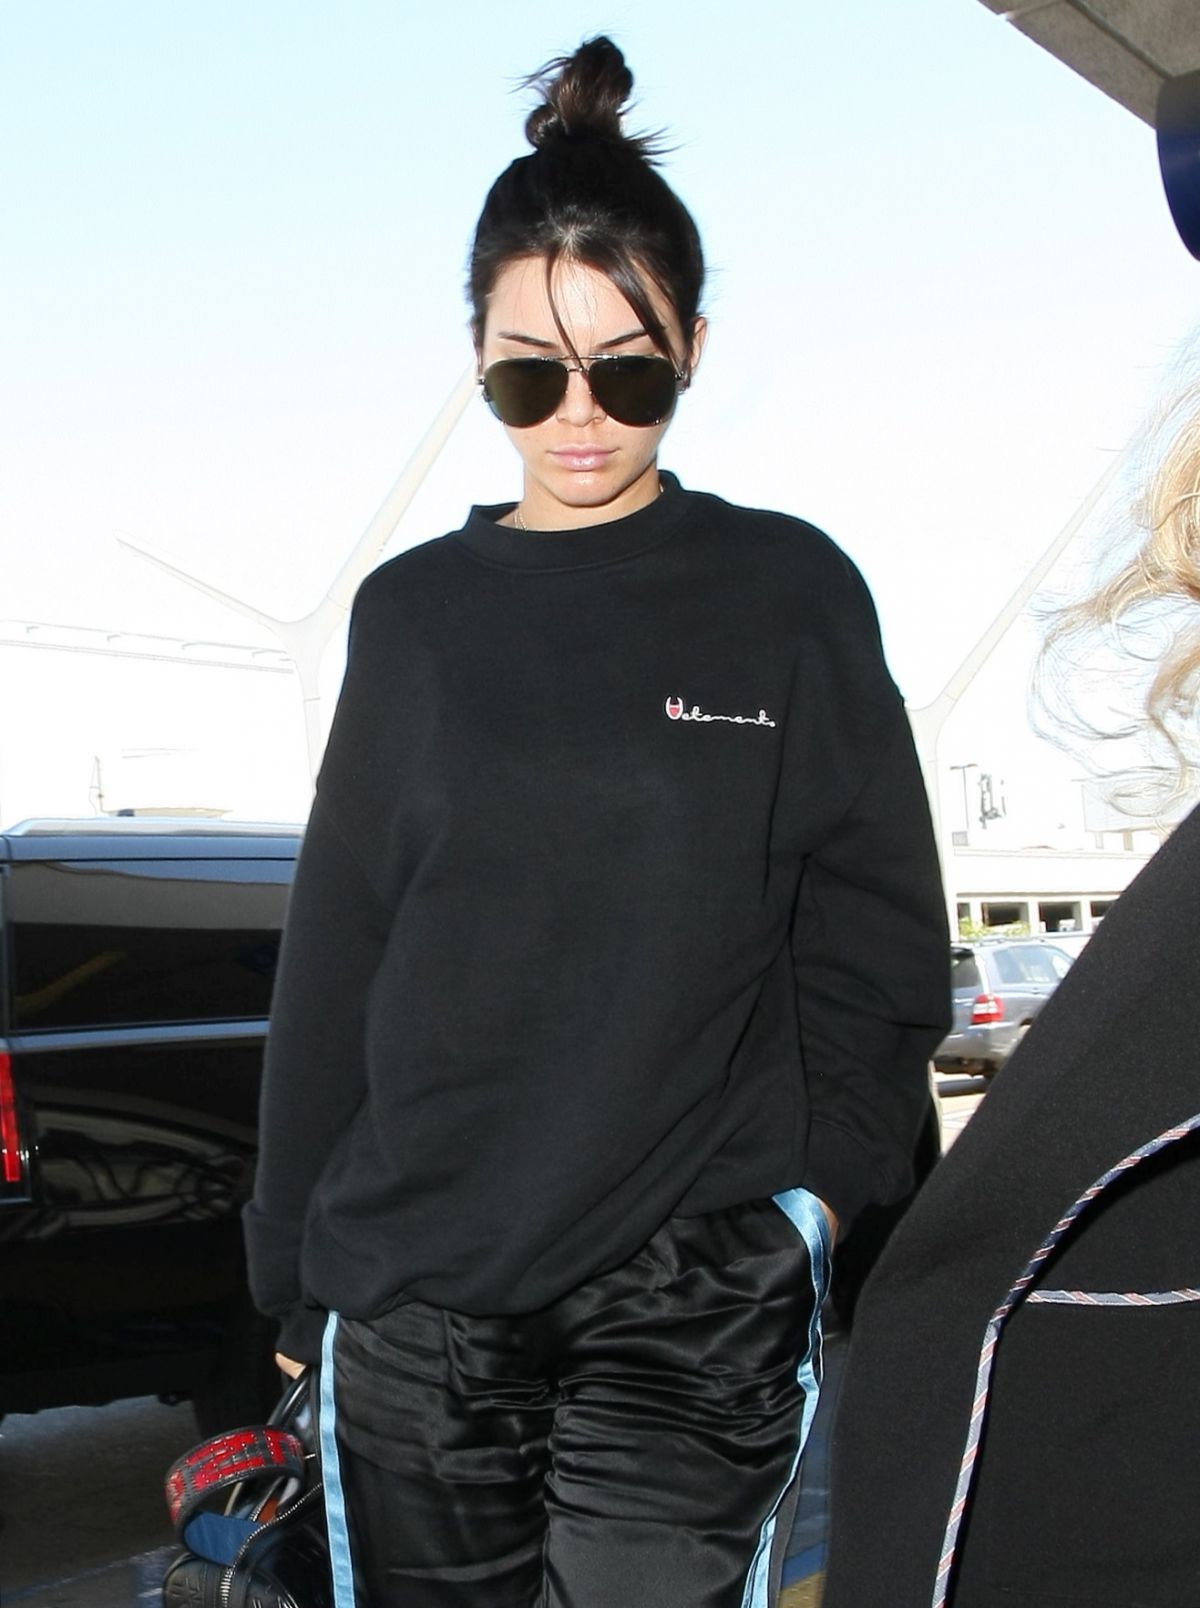 KENDALL JENNER at LAX Airport in Los Angeles 09/26/2016 – HawtCelebs